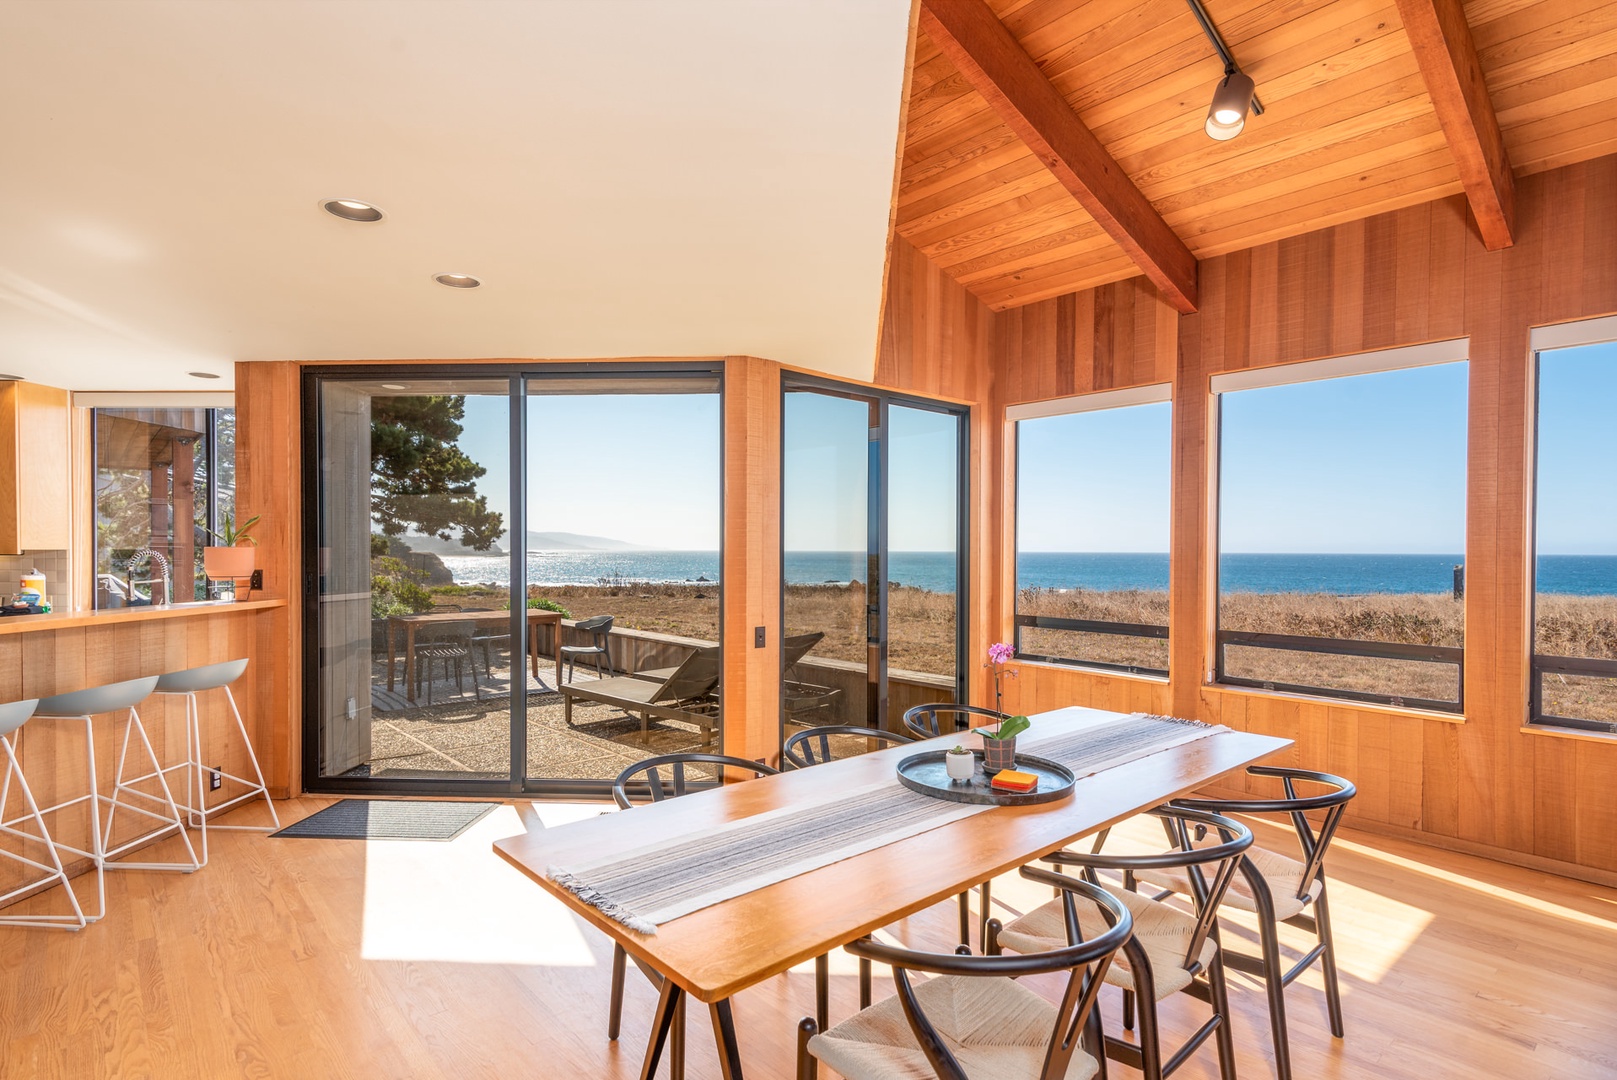 Enjoy ocean views around the dining table with seating for 6